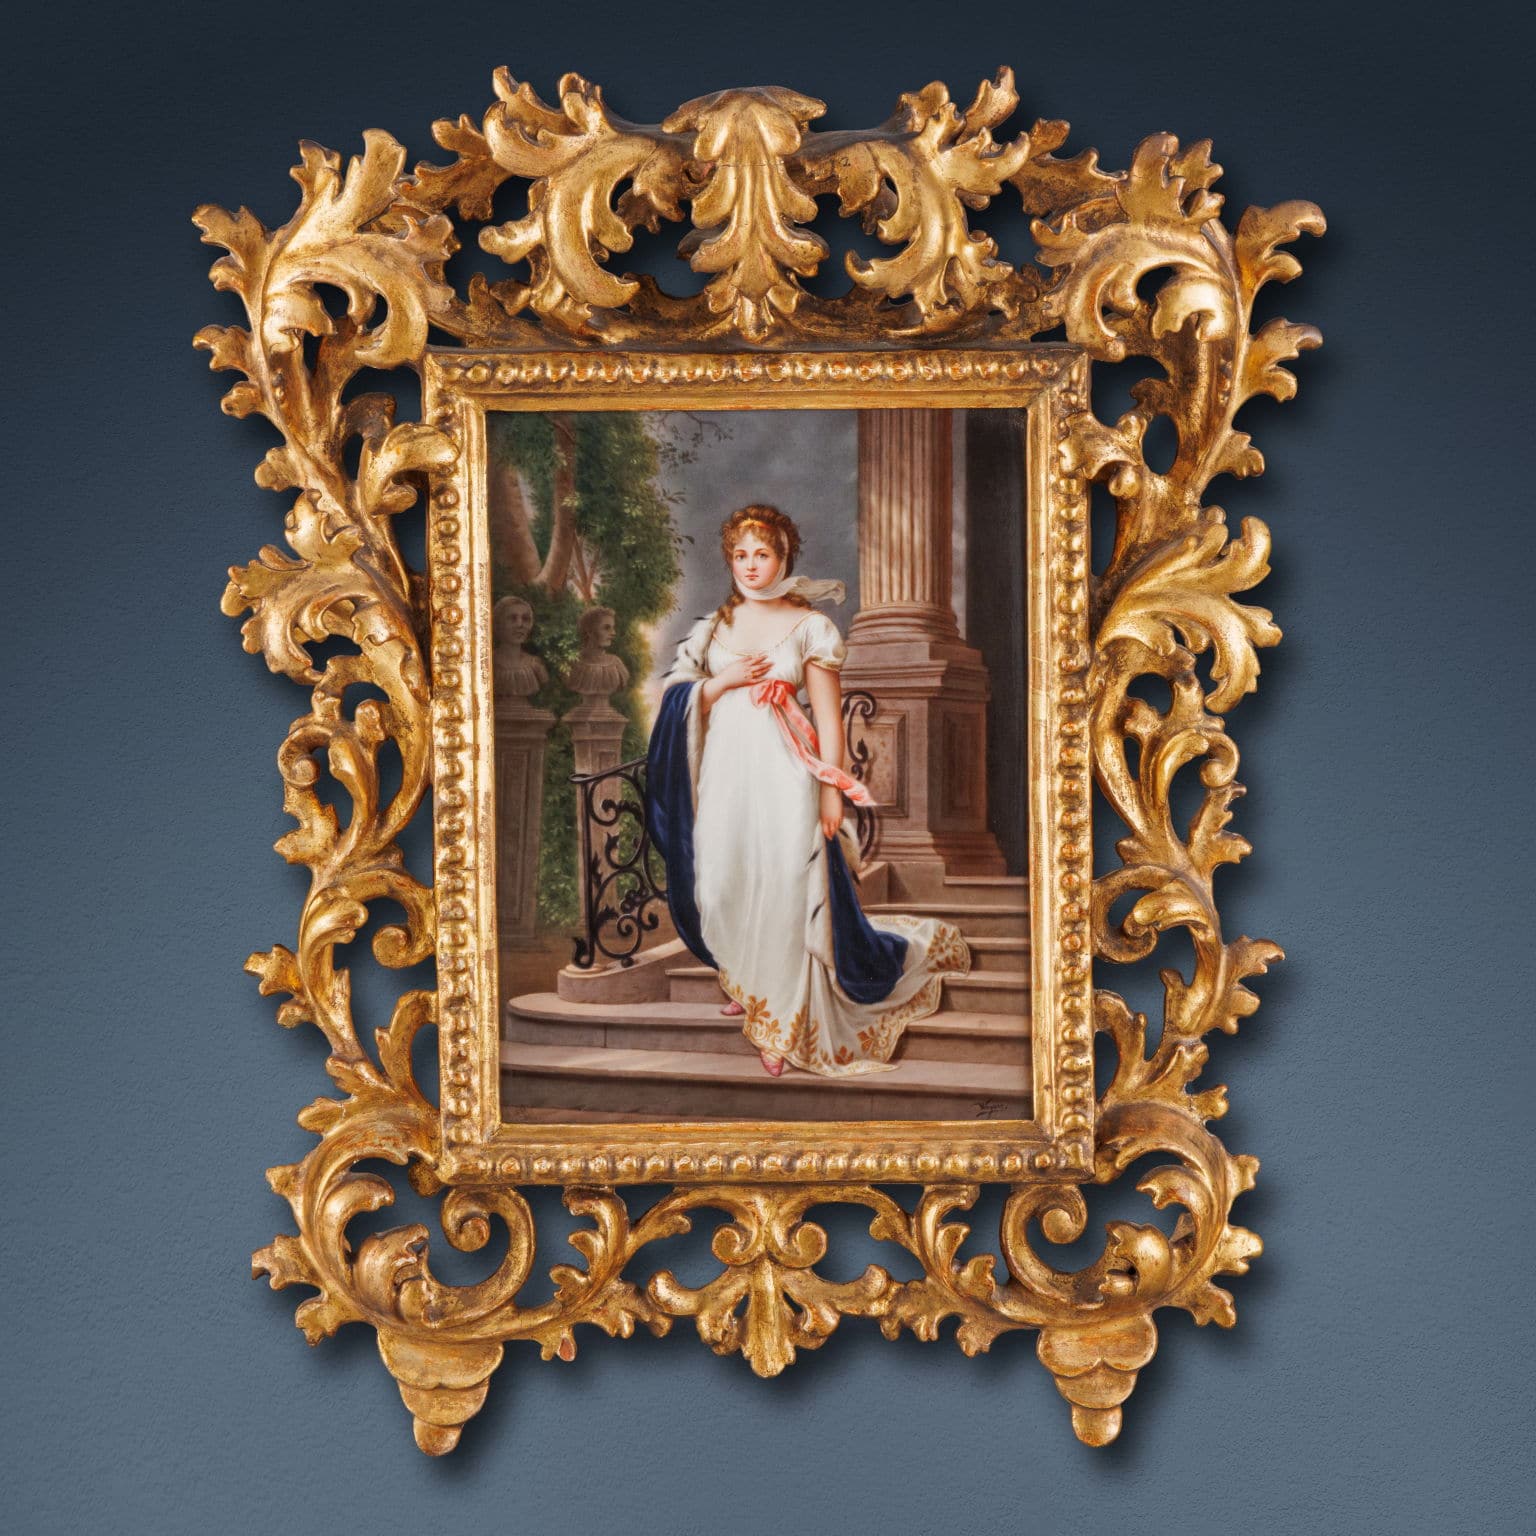 Porcelain tablet Queen Louise of Prussia, Berlin, last quarter of the 19th century